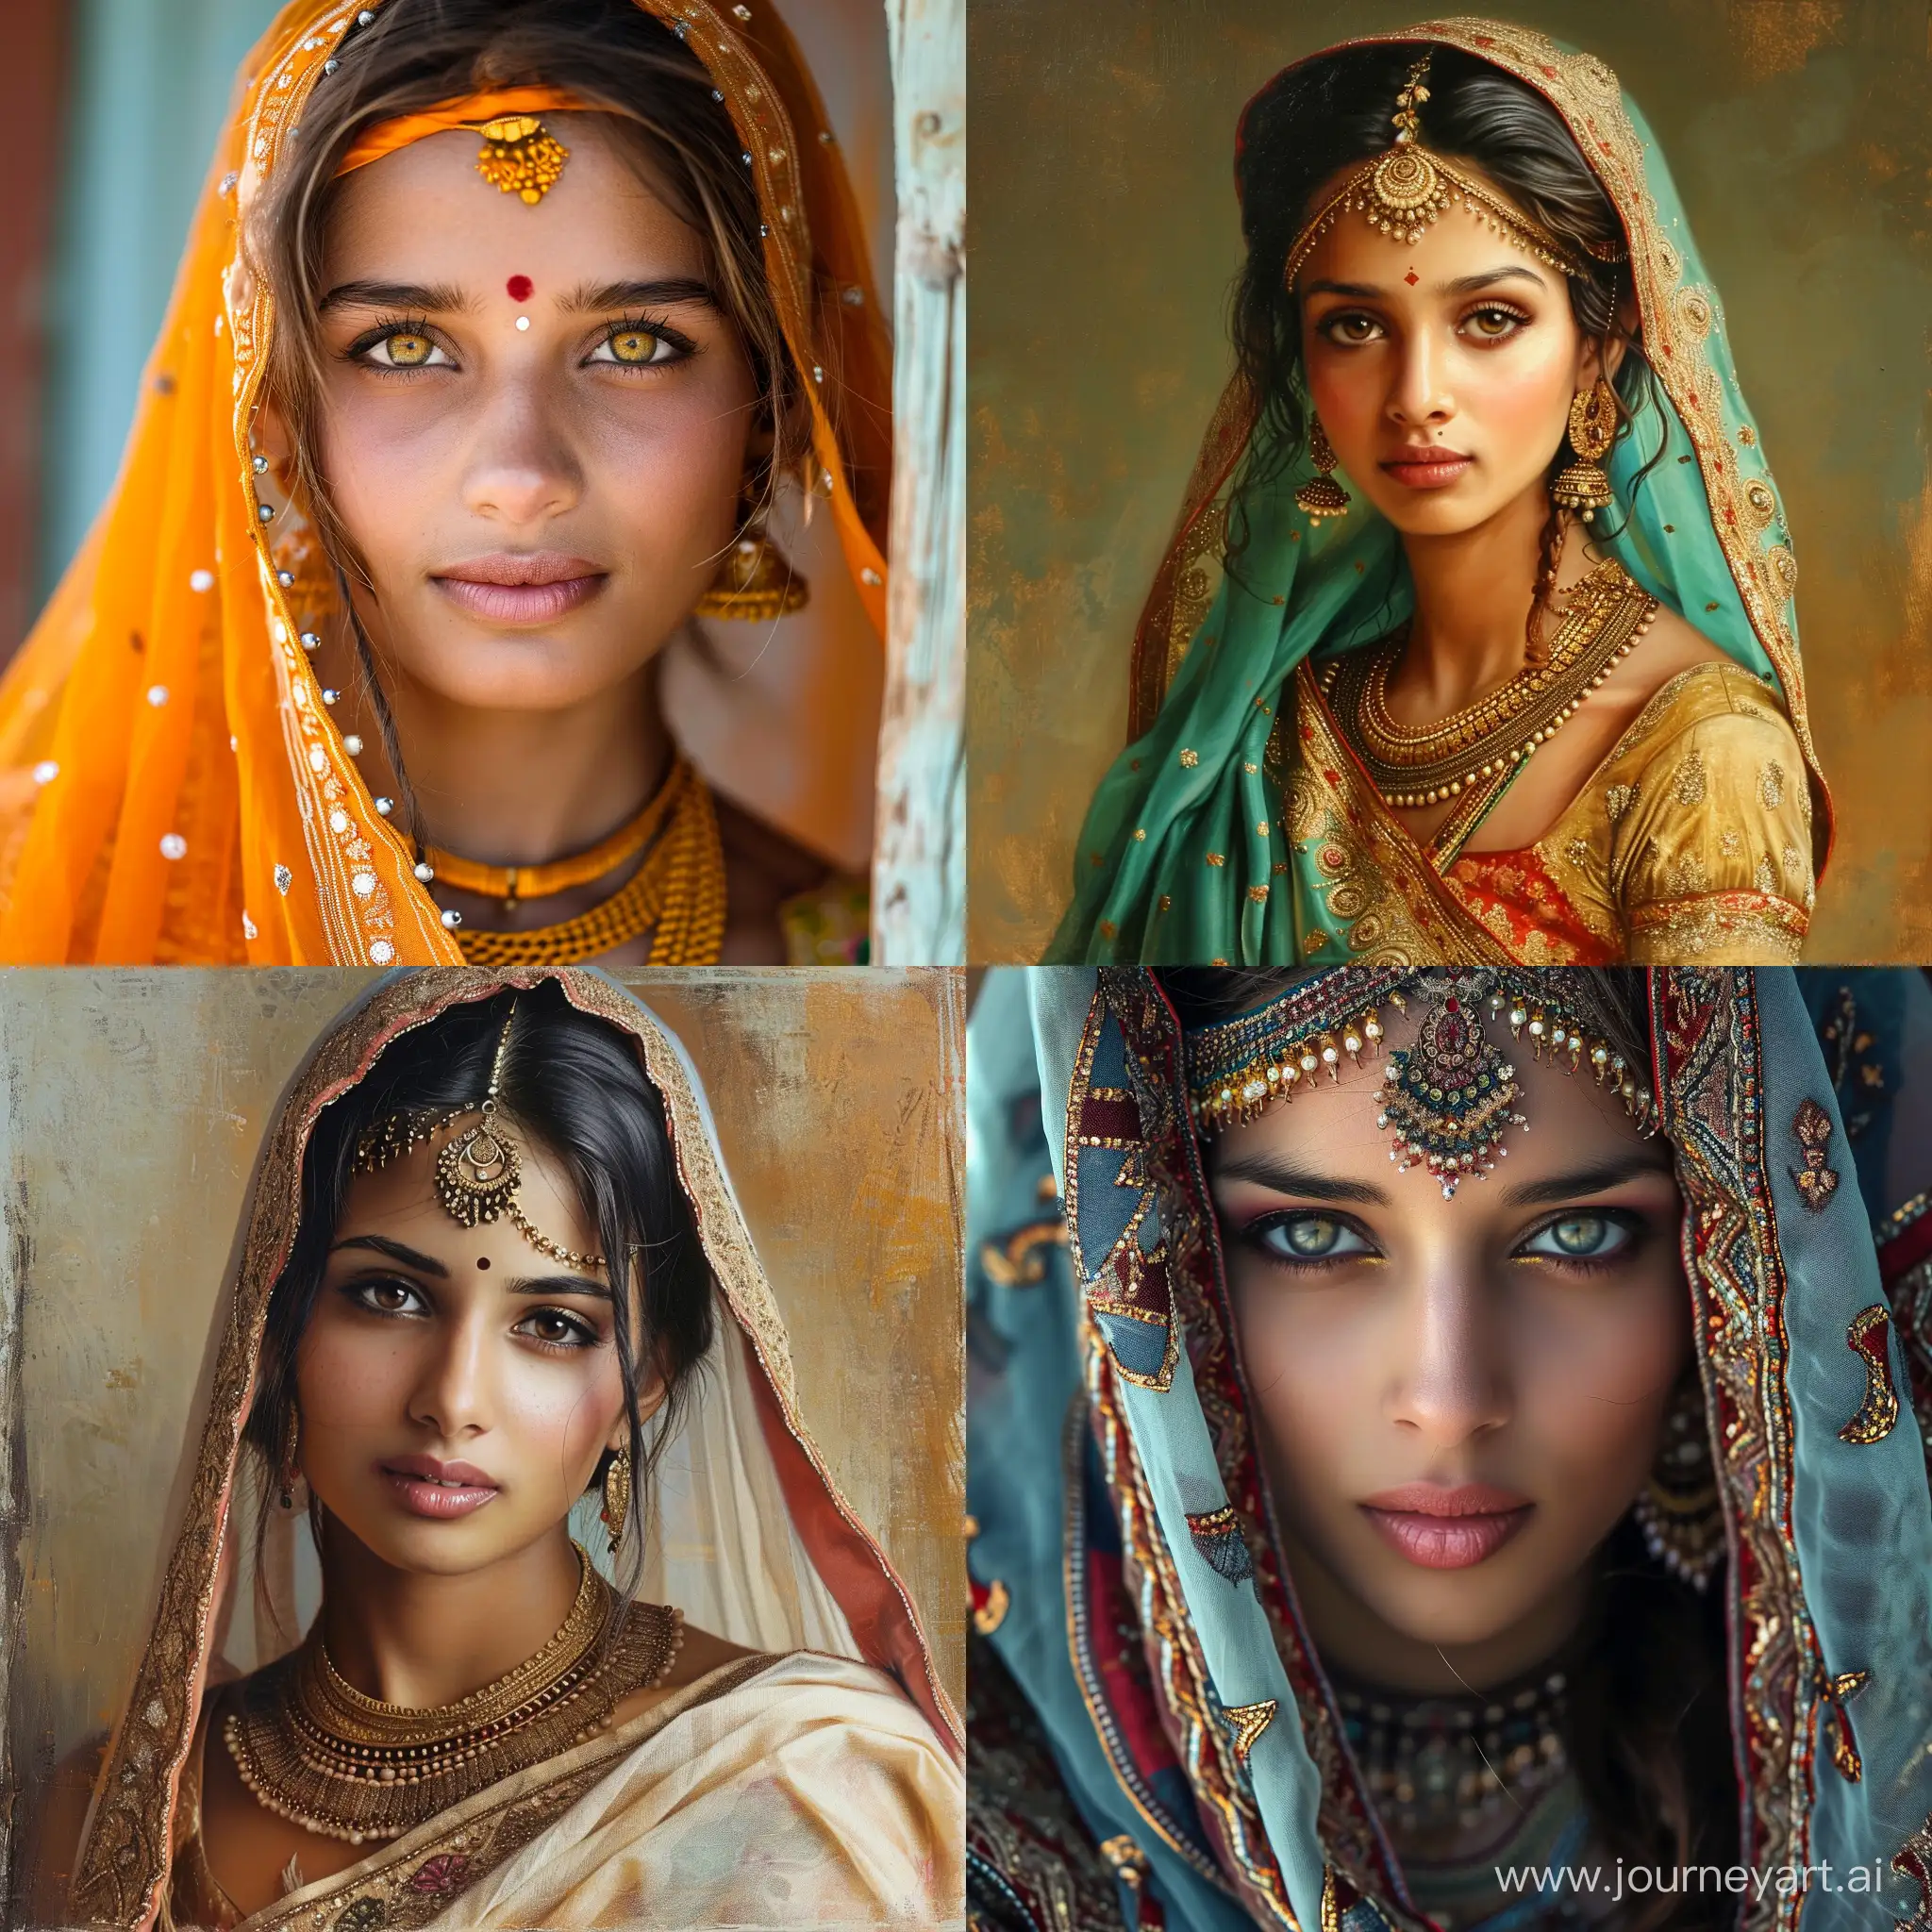 Vibrant-Indian-Women-in-Traditional-Attire